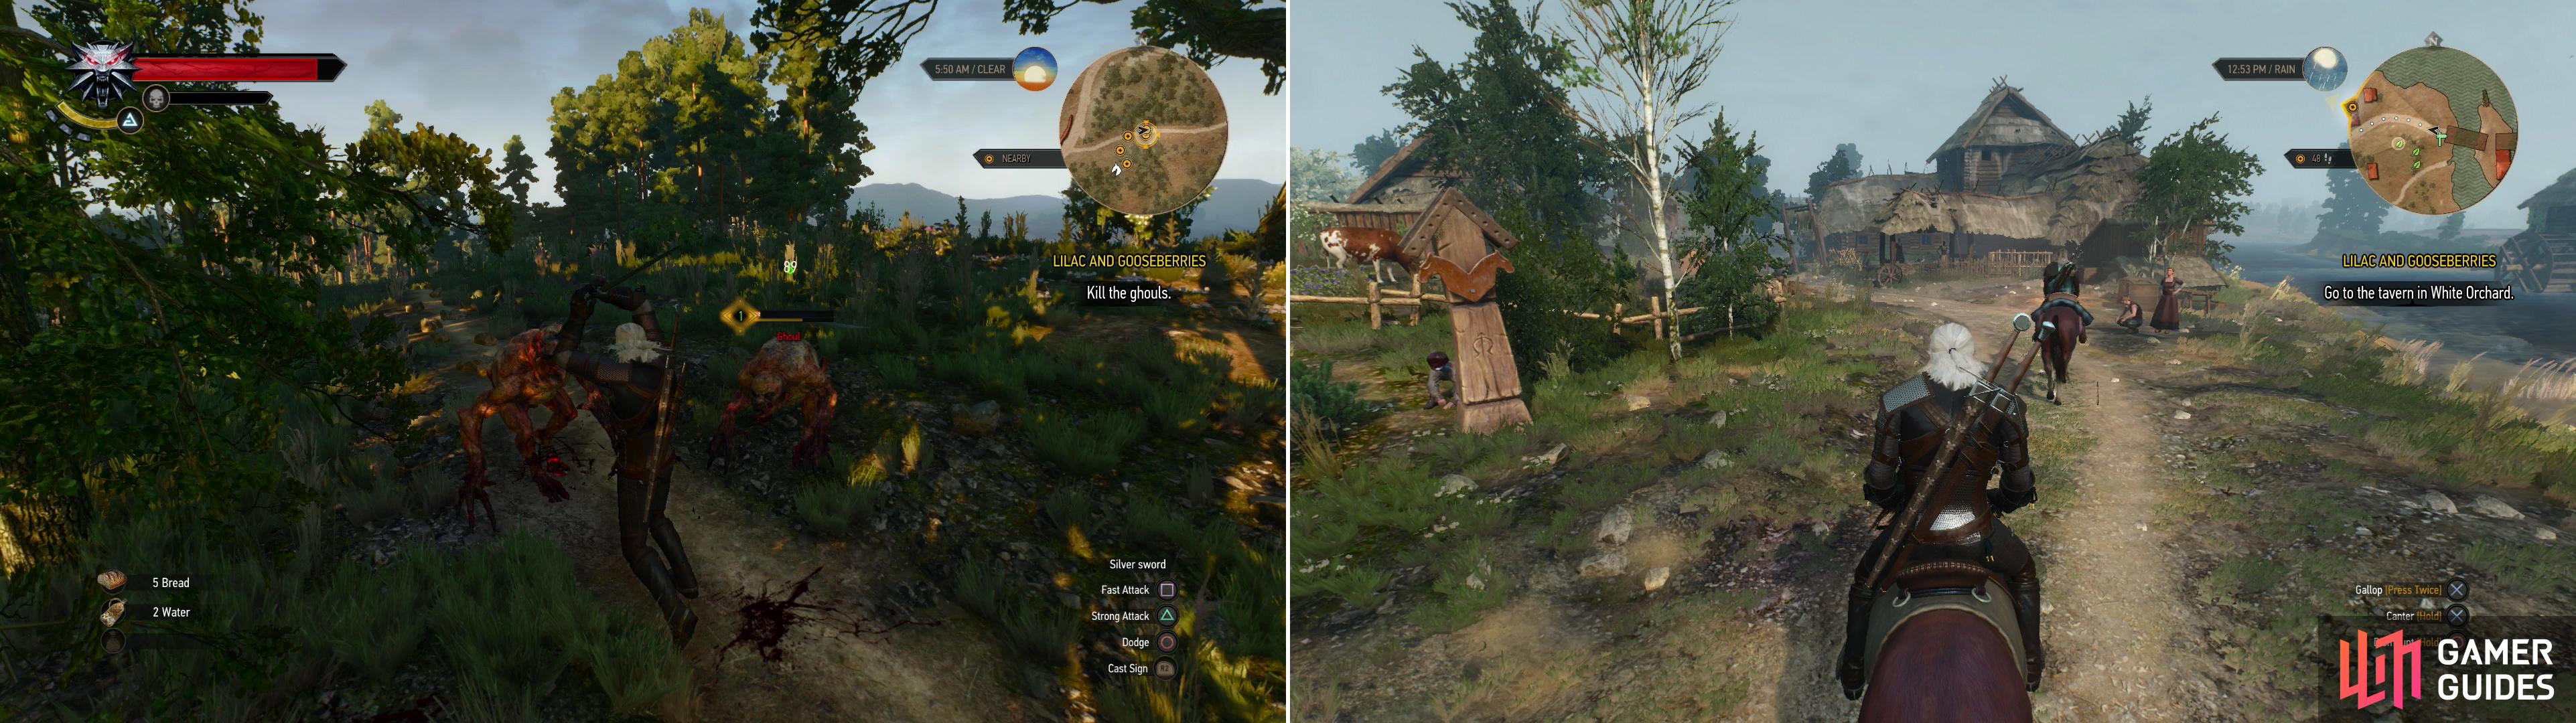 Fight off the Ghouls that attack, drawn by the stench of death in the wake of the army’s march (left), then follow Vesemir to White Orchard (right).